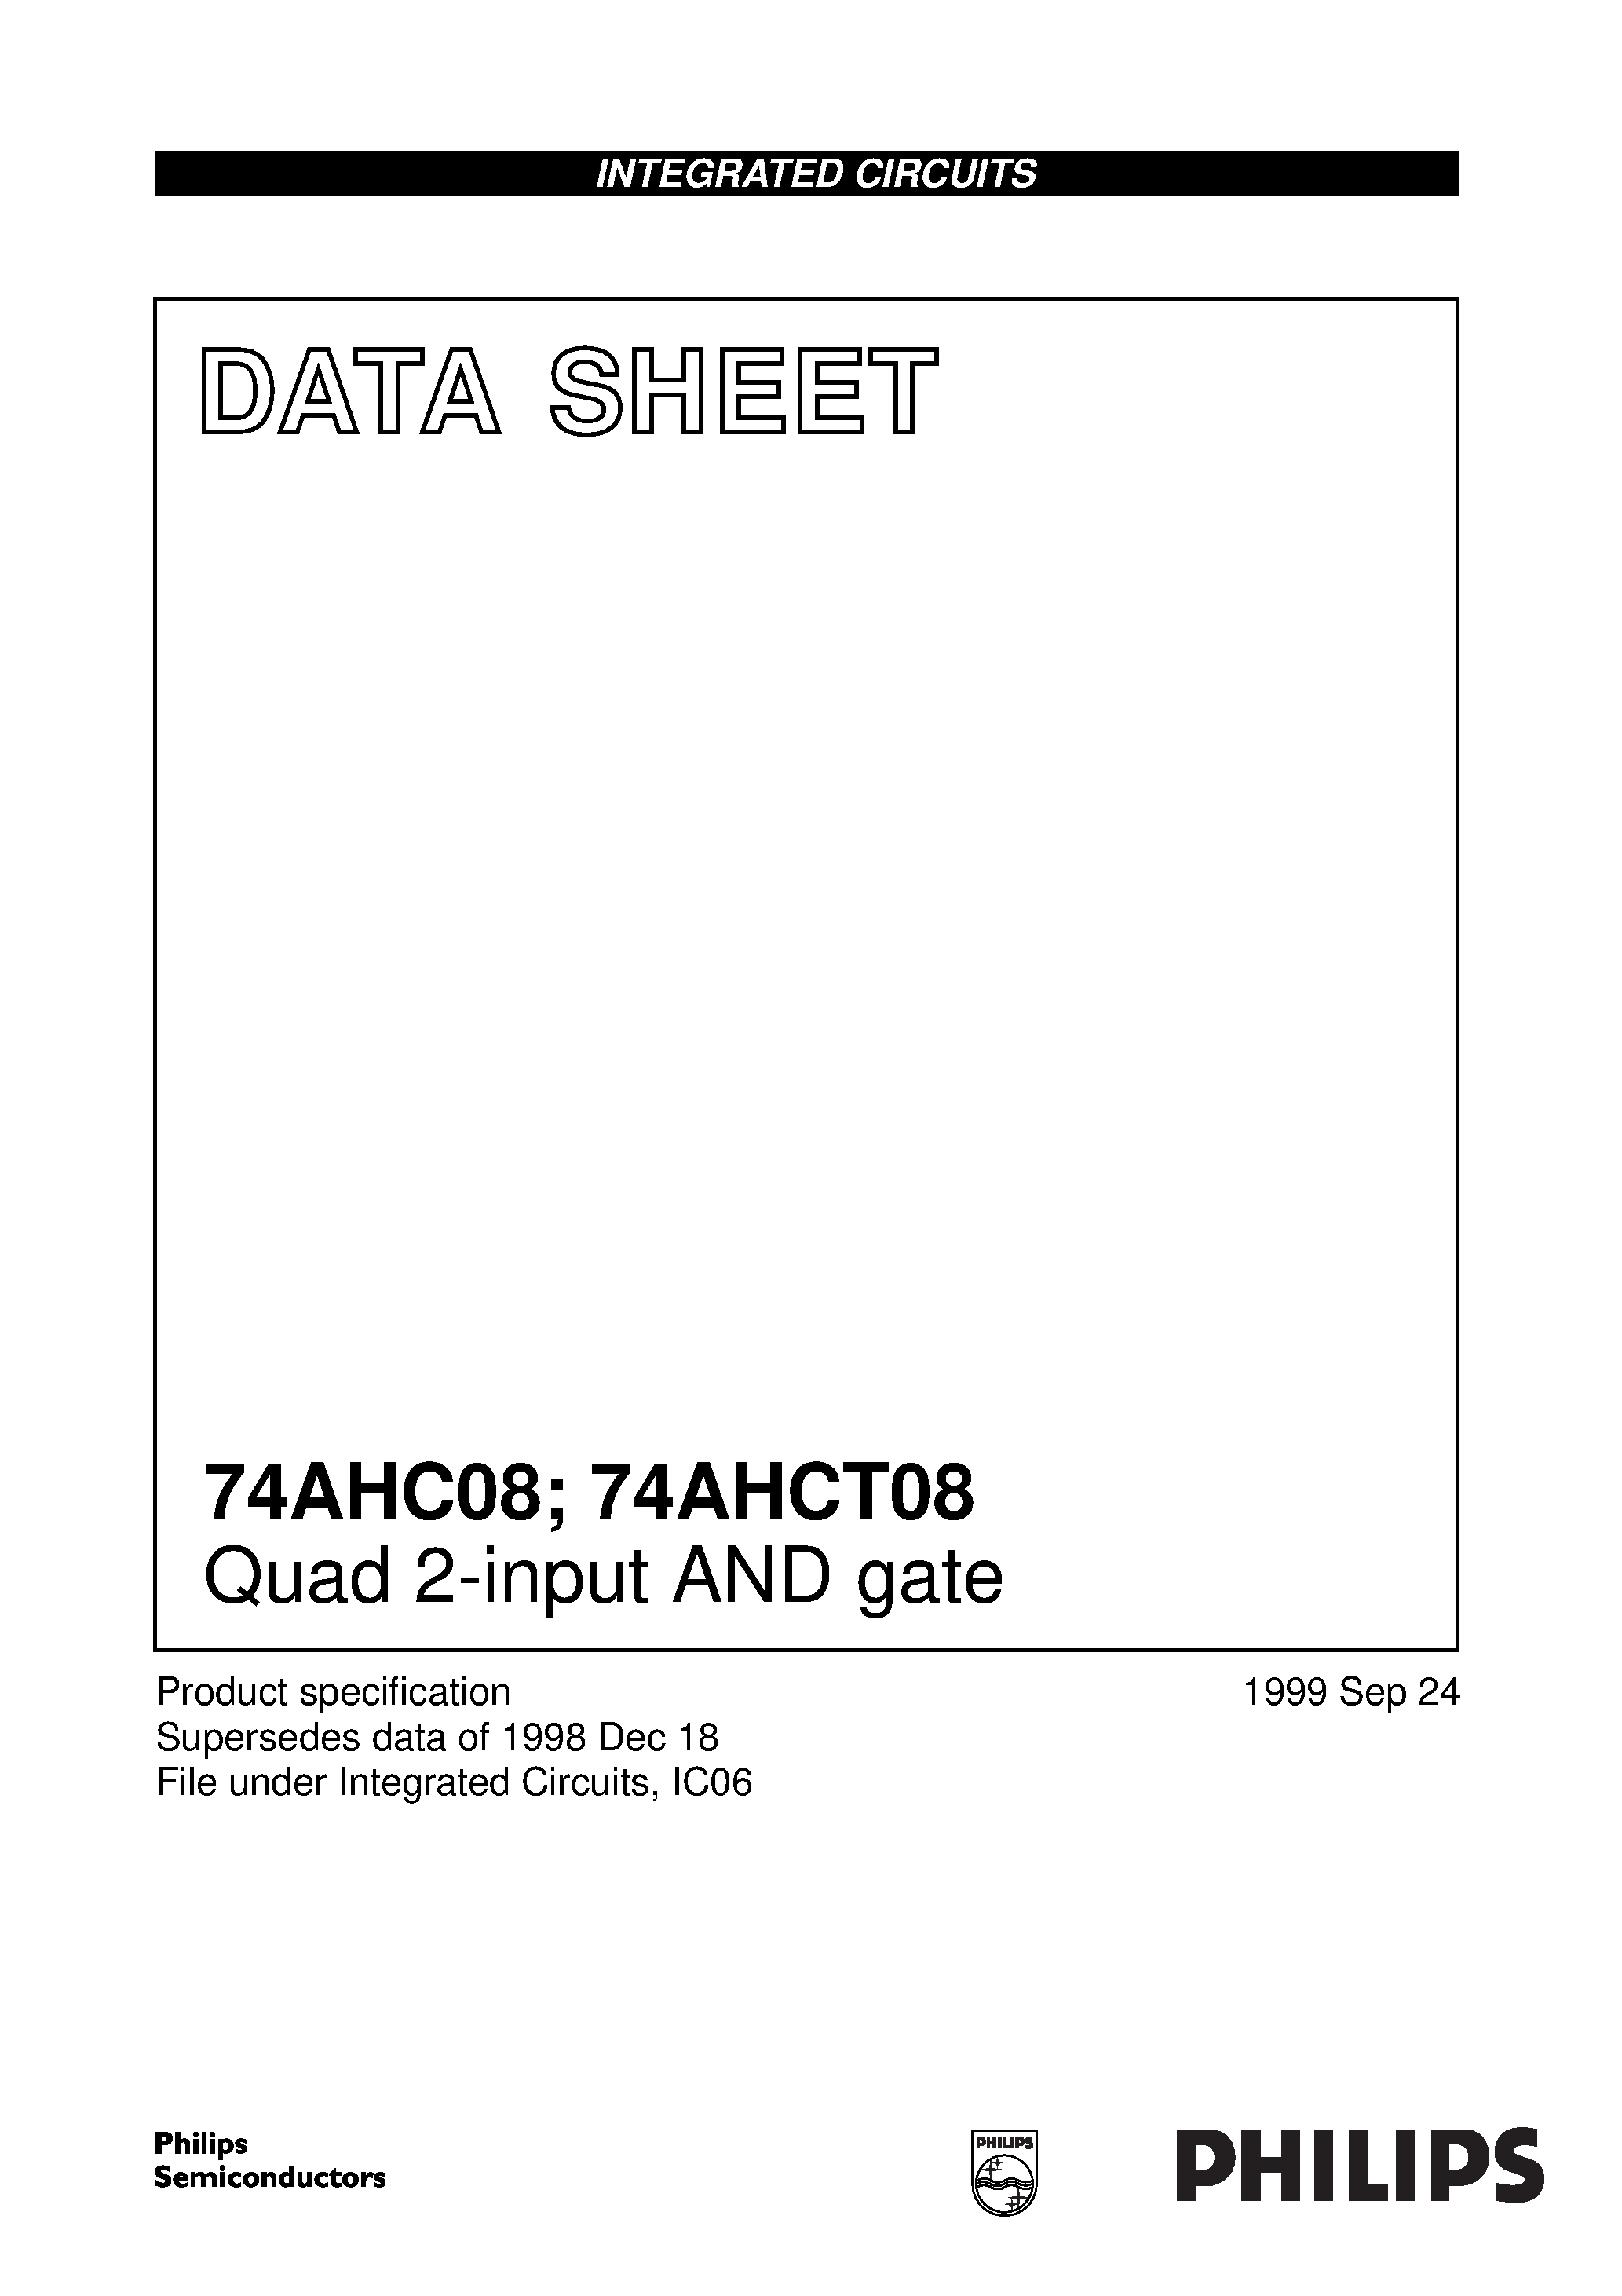 Datasheet 74AHC08PW - Quad 2-input AND gate page 1